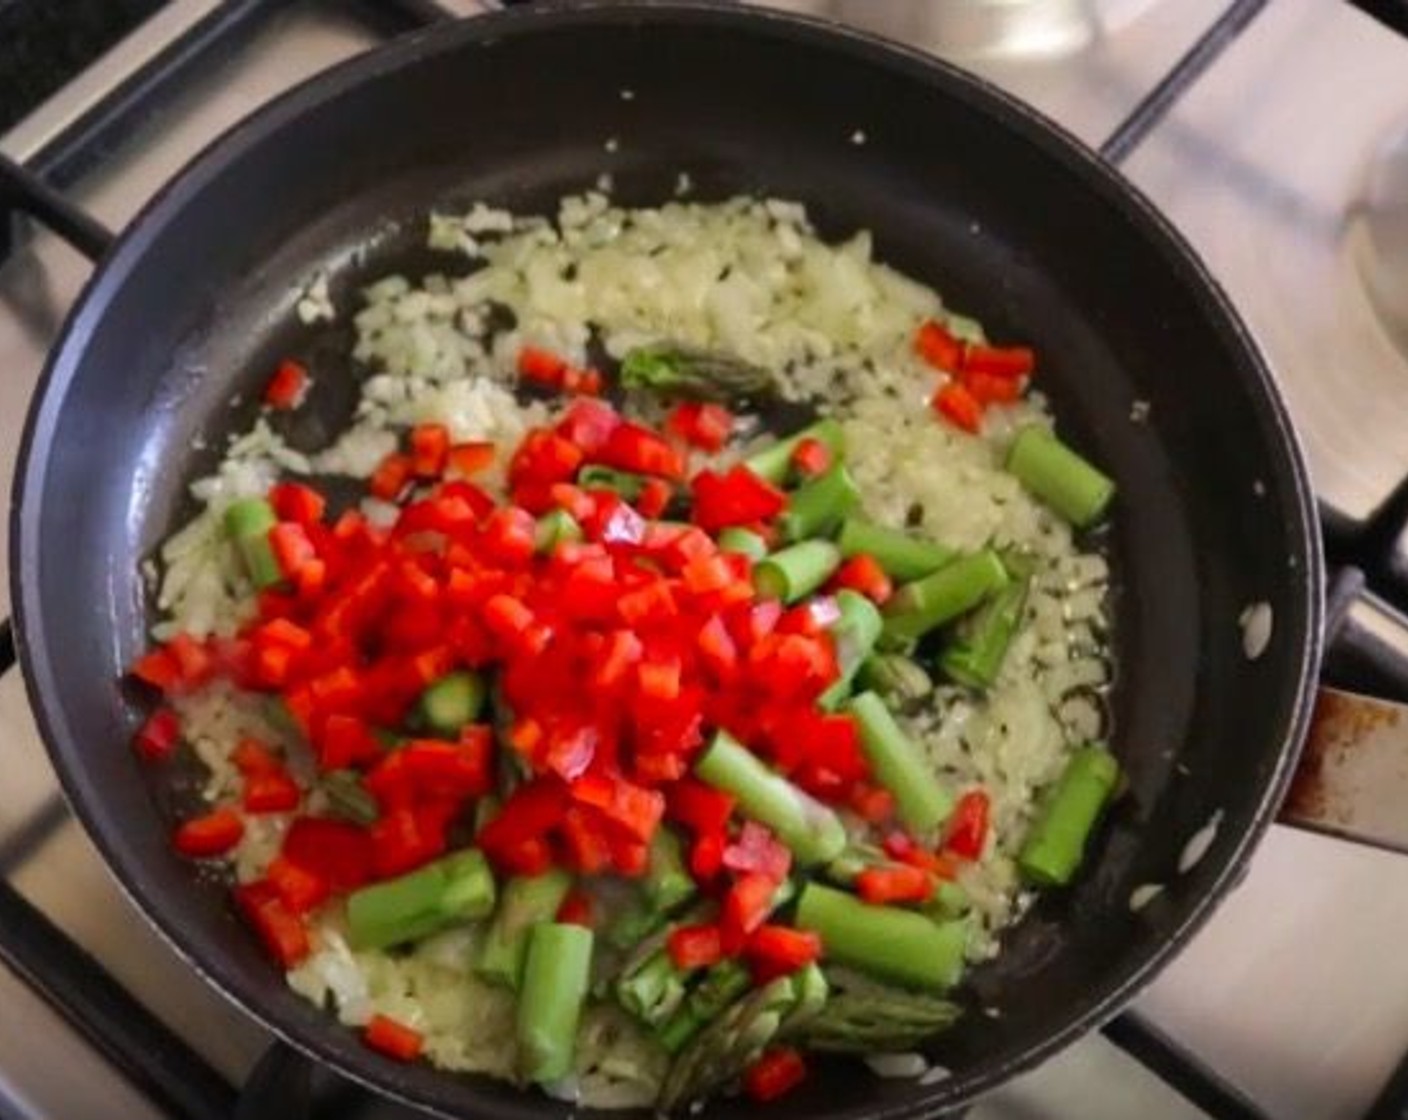 step 7 Add the asparagus and red bell peppers. Cook for about 4 minutes.